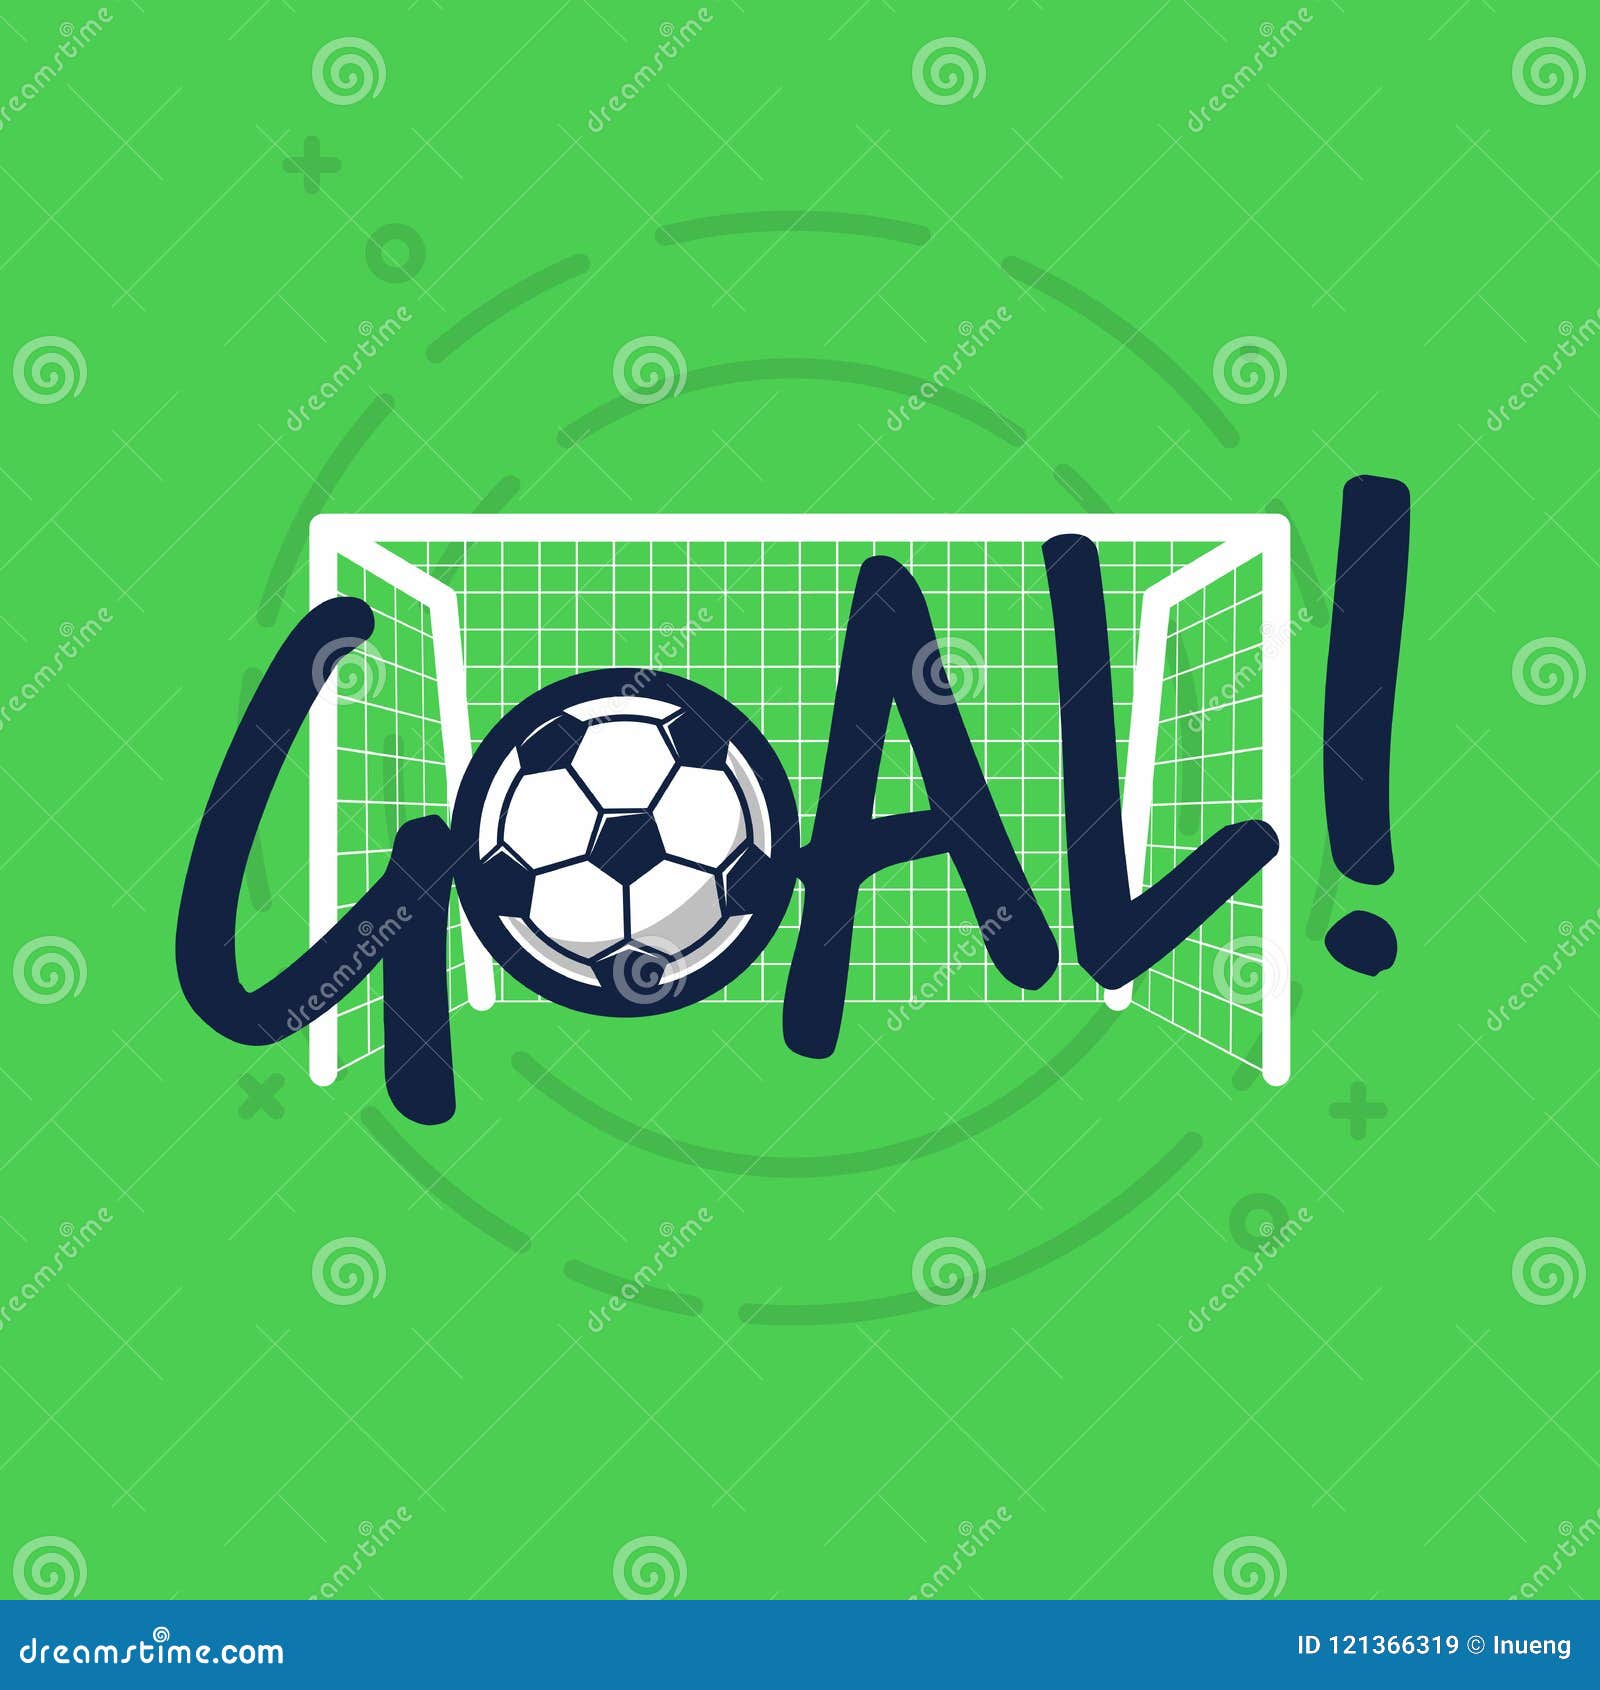 Goal Sign For Football Or Soccer Game Flat Vector On Green Background Stock Vector Illustration Of Graphic Goalkeeper